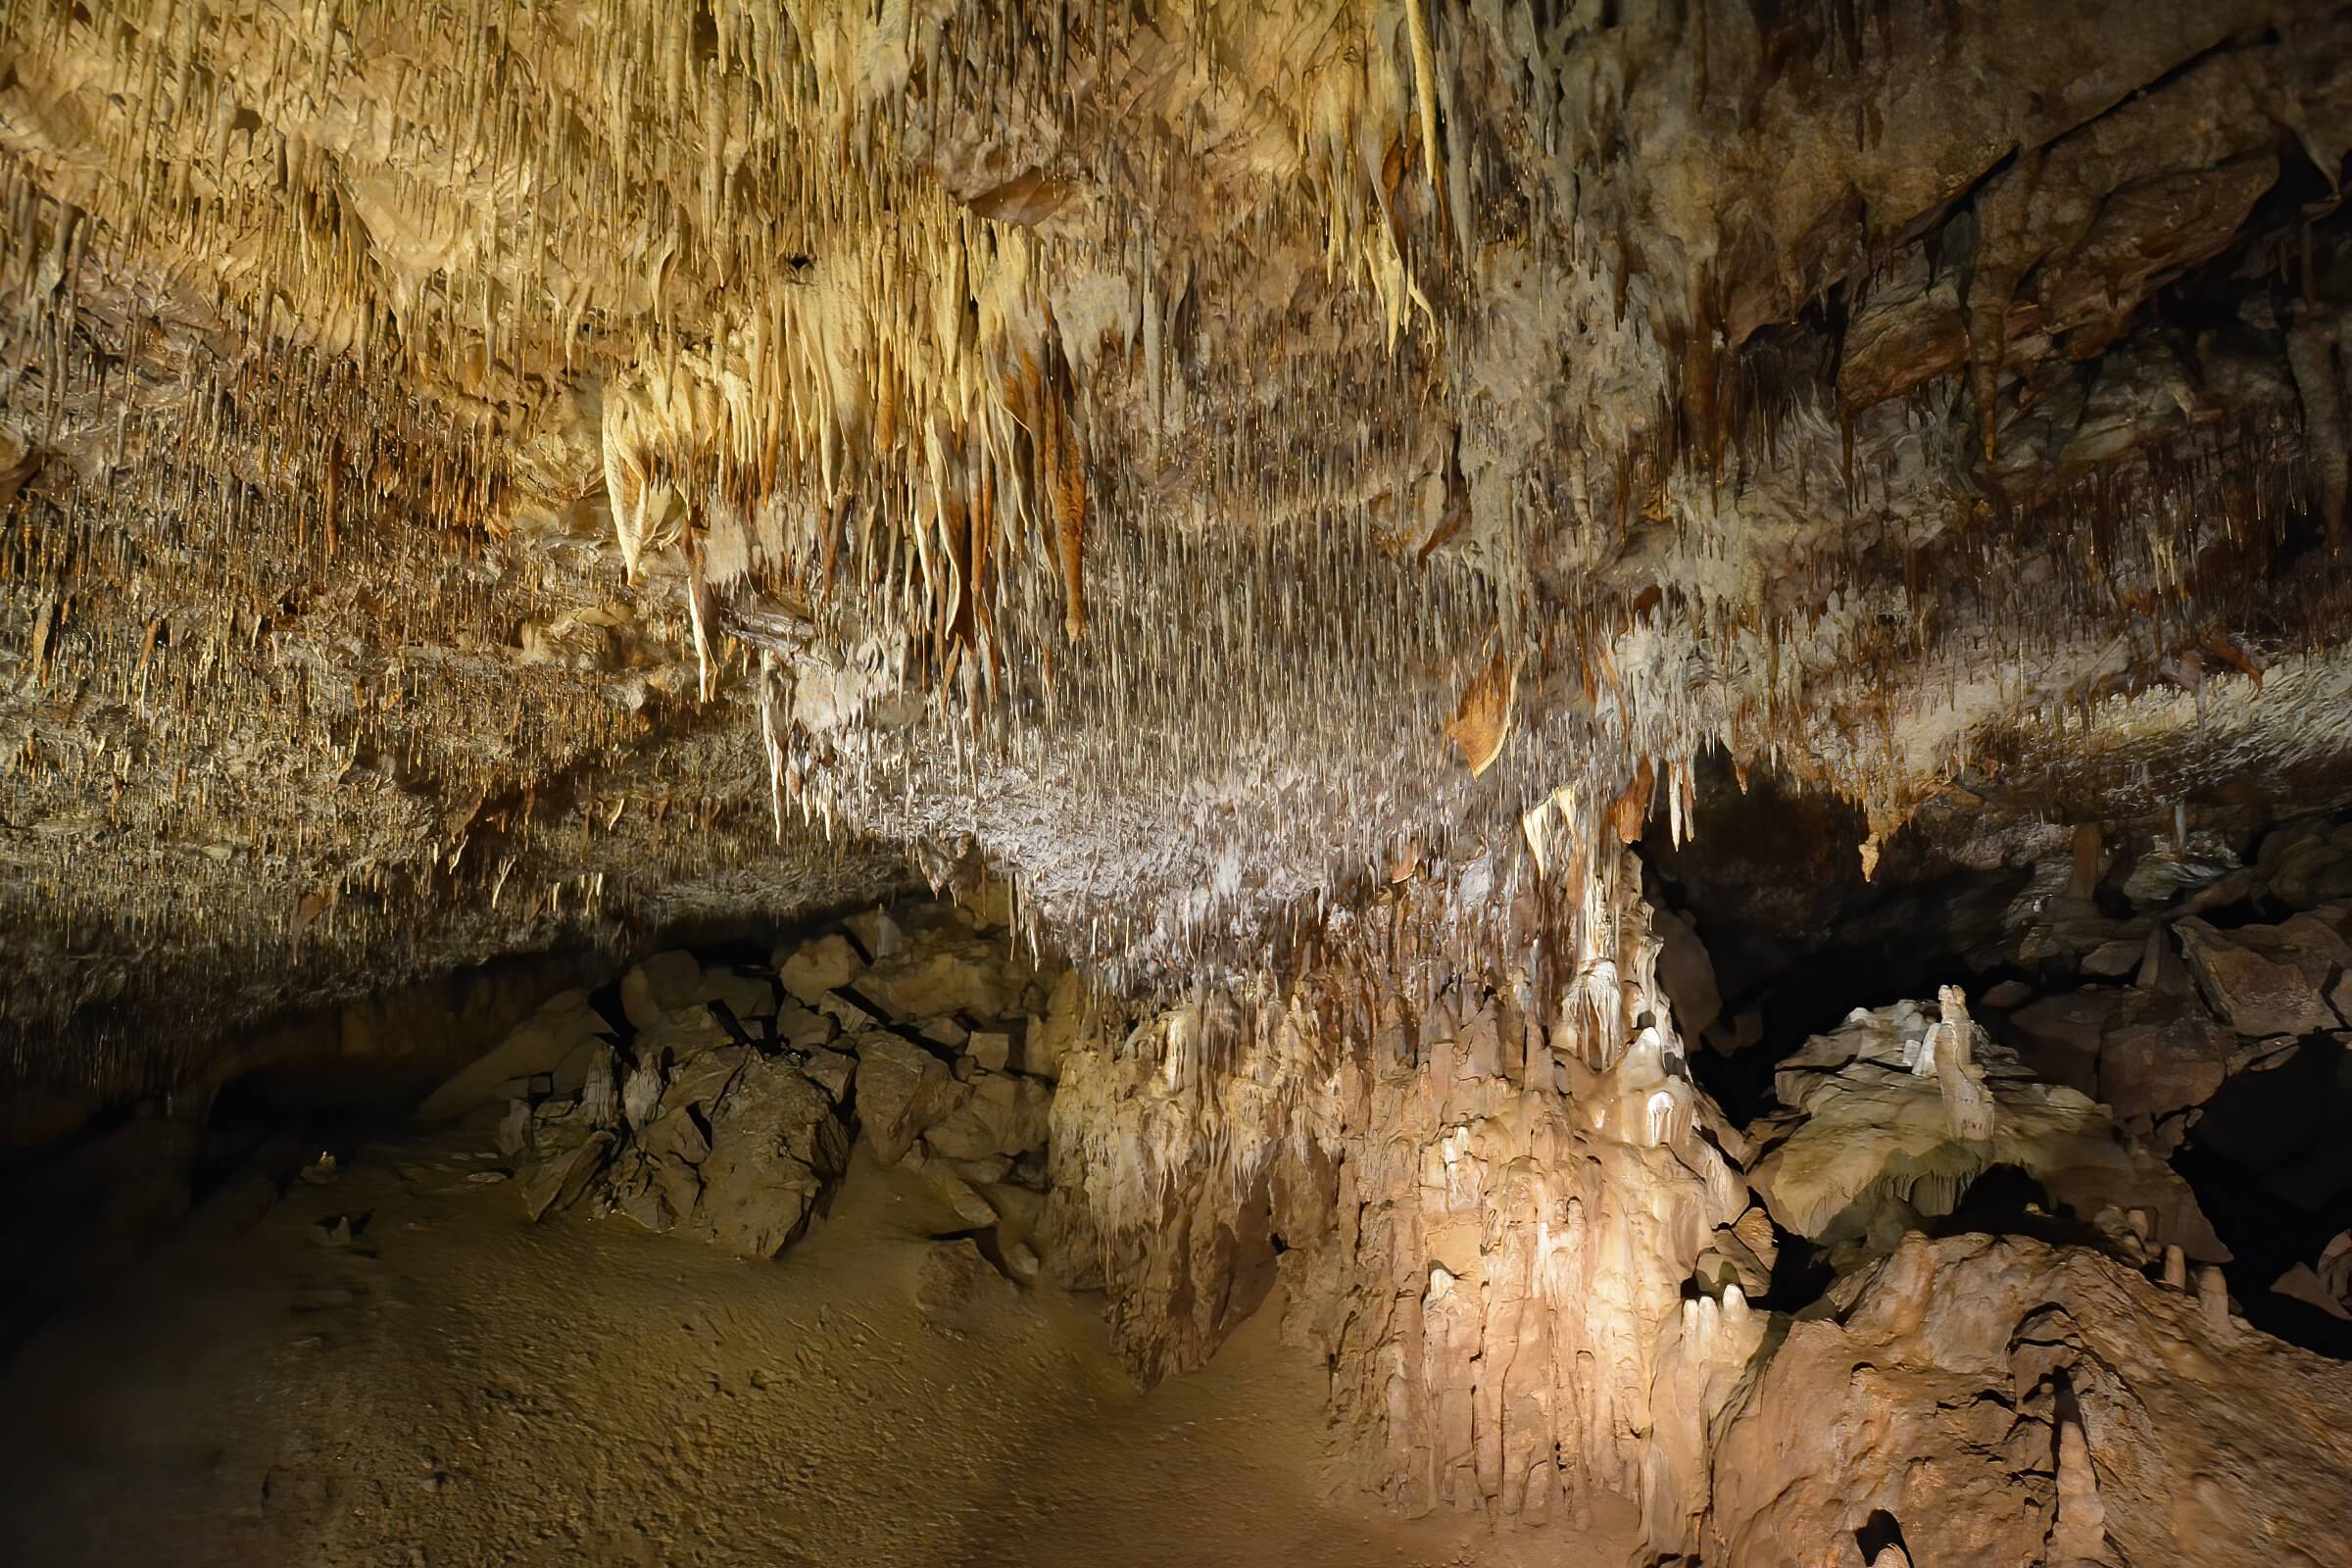 A picture of the inside of kapsia cave depicting many small stalactites